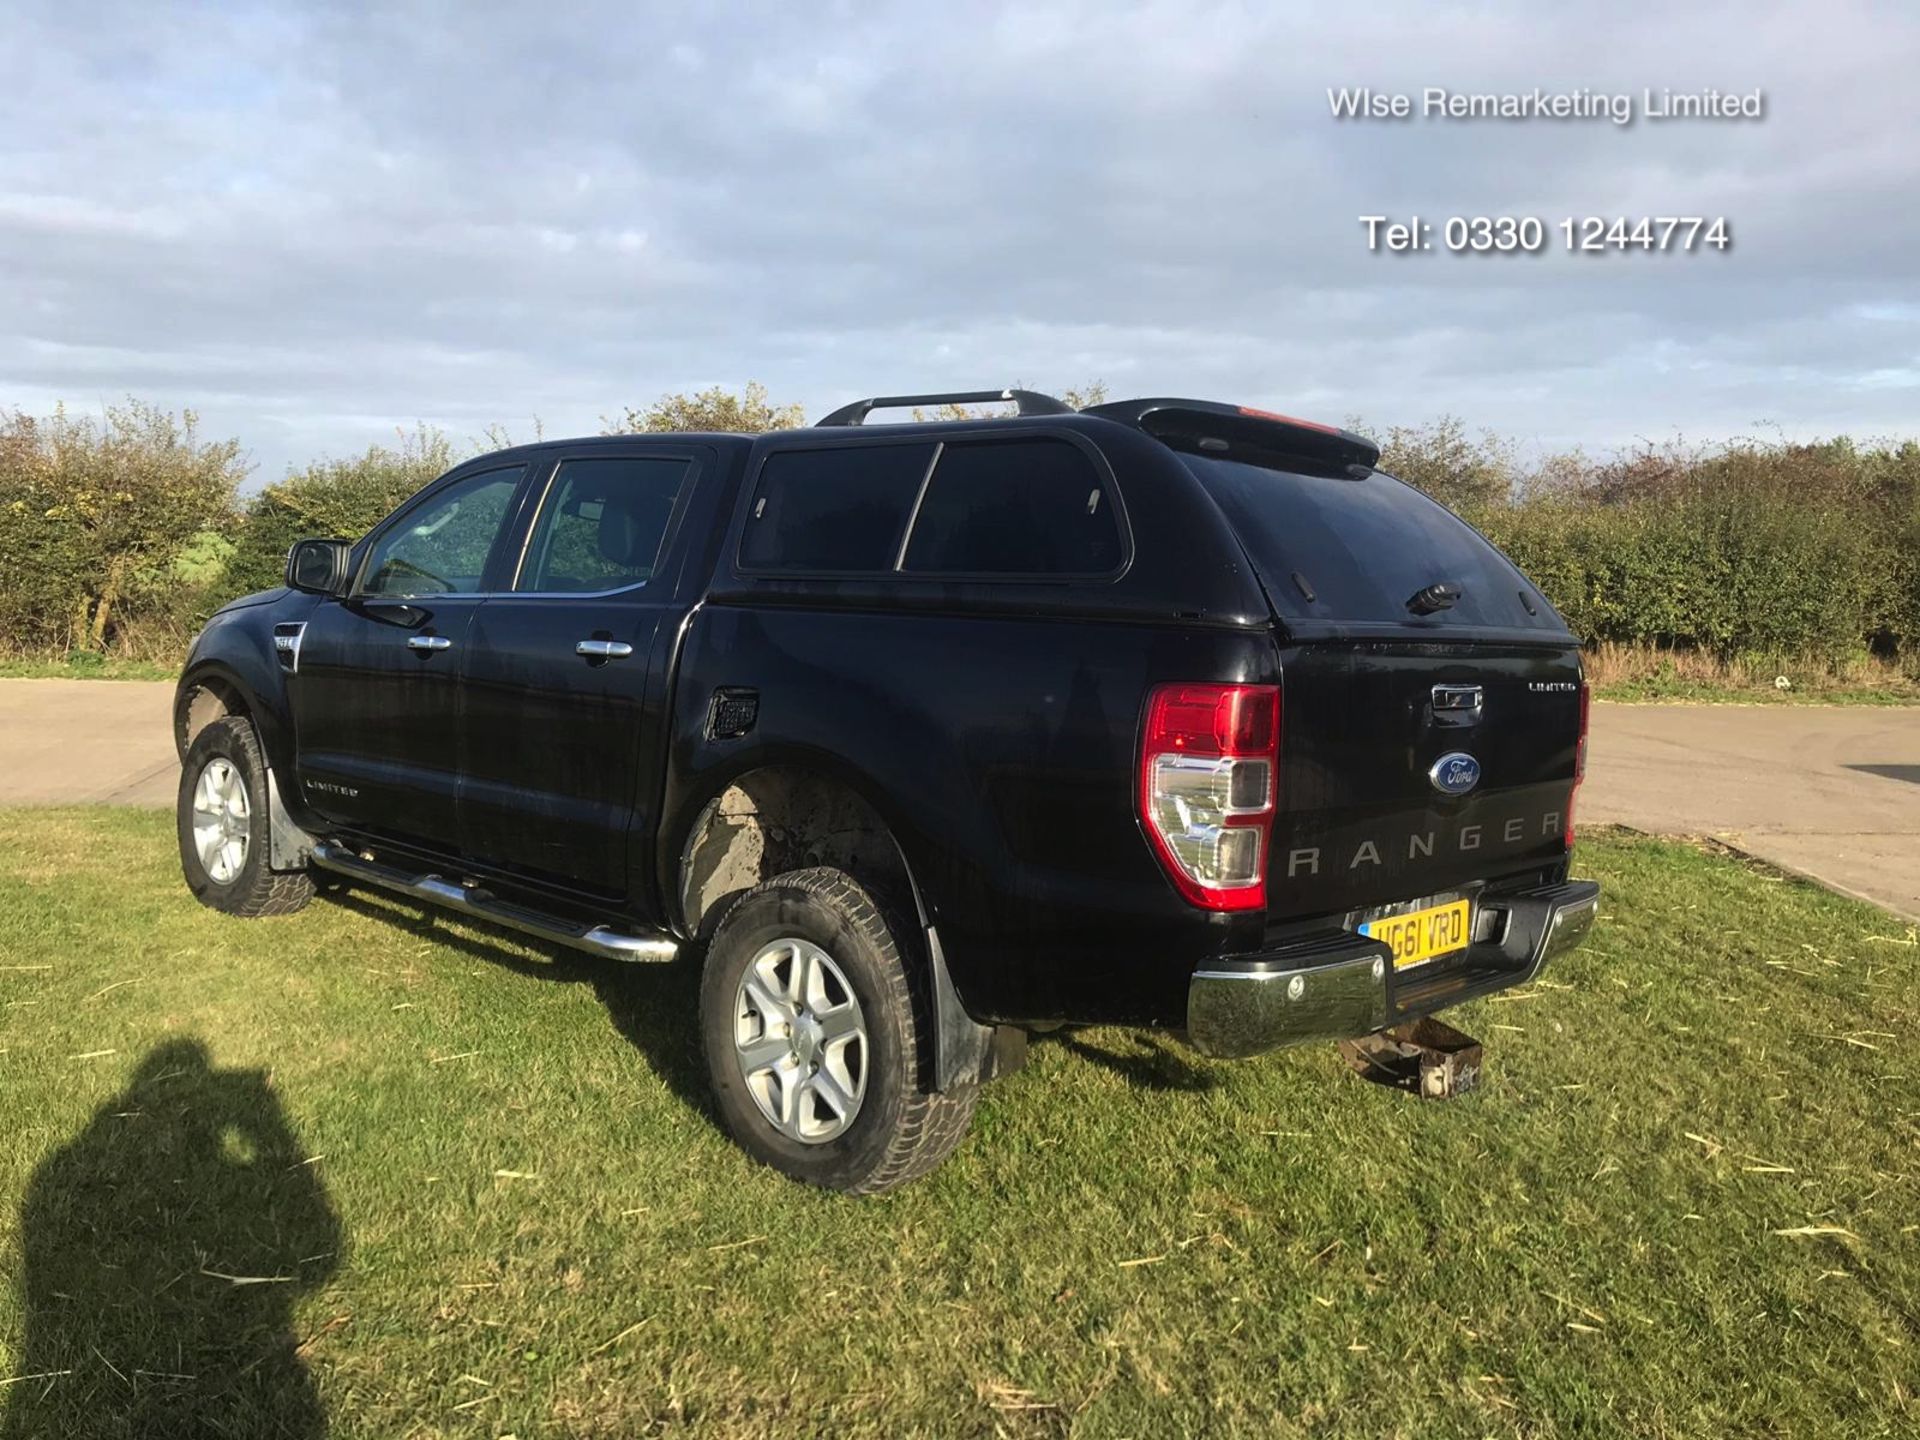 Ford Ranger 3.2l Tdci (200 BHP) Limited 4x4 - 2012 Model - Black - Double Cab - Image 3 of 18